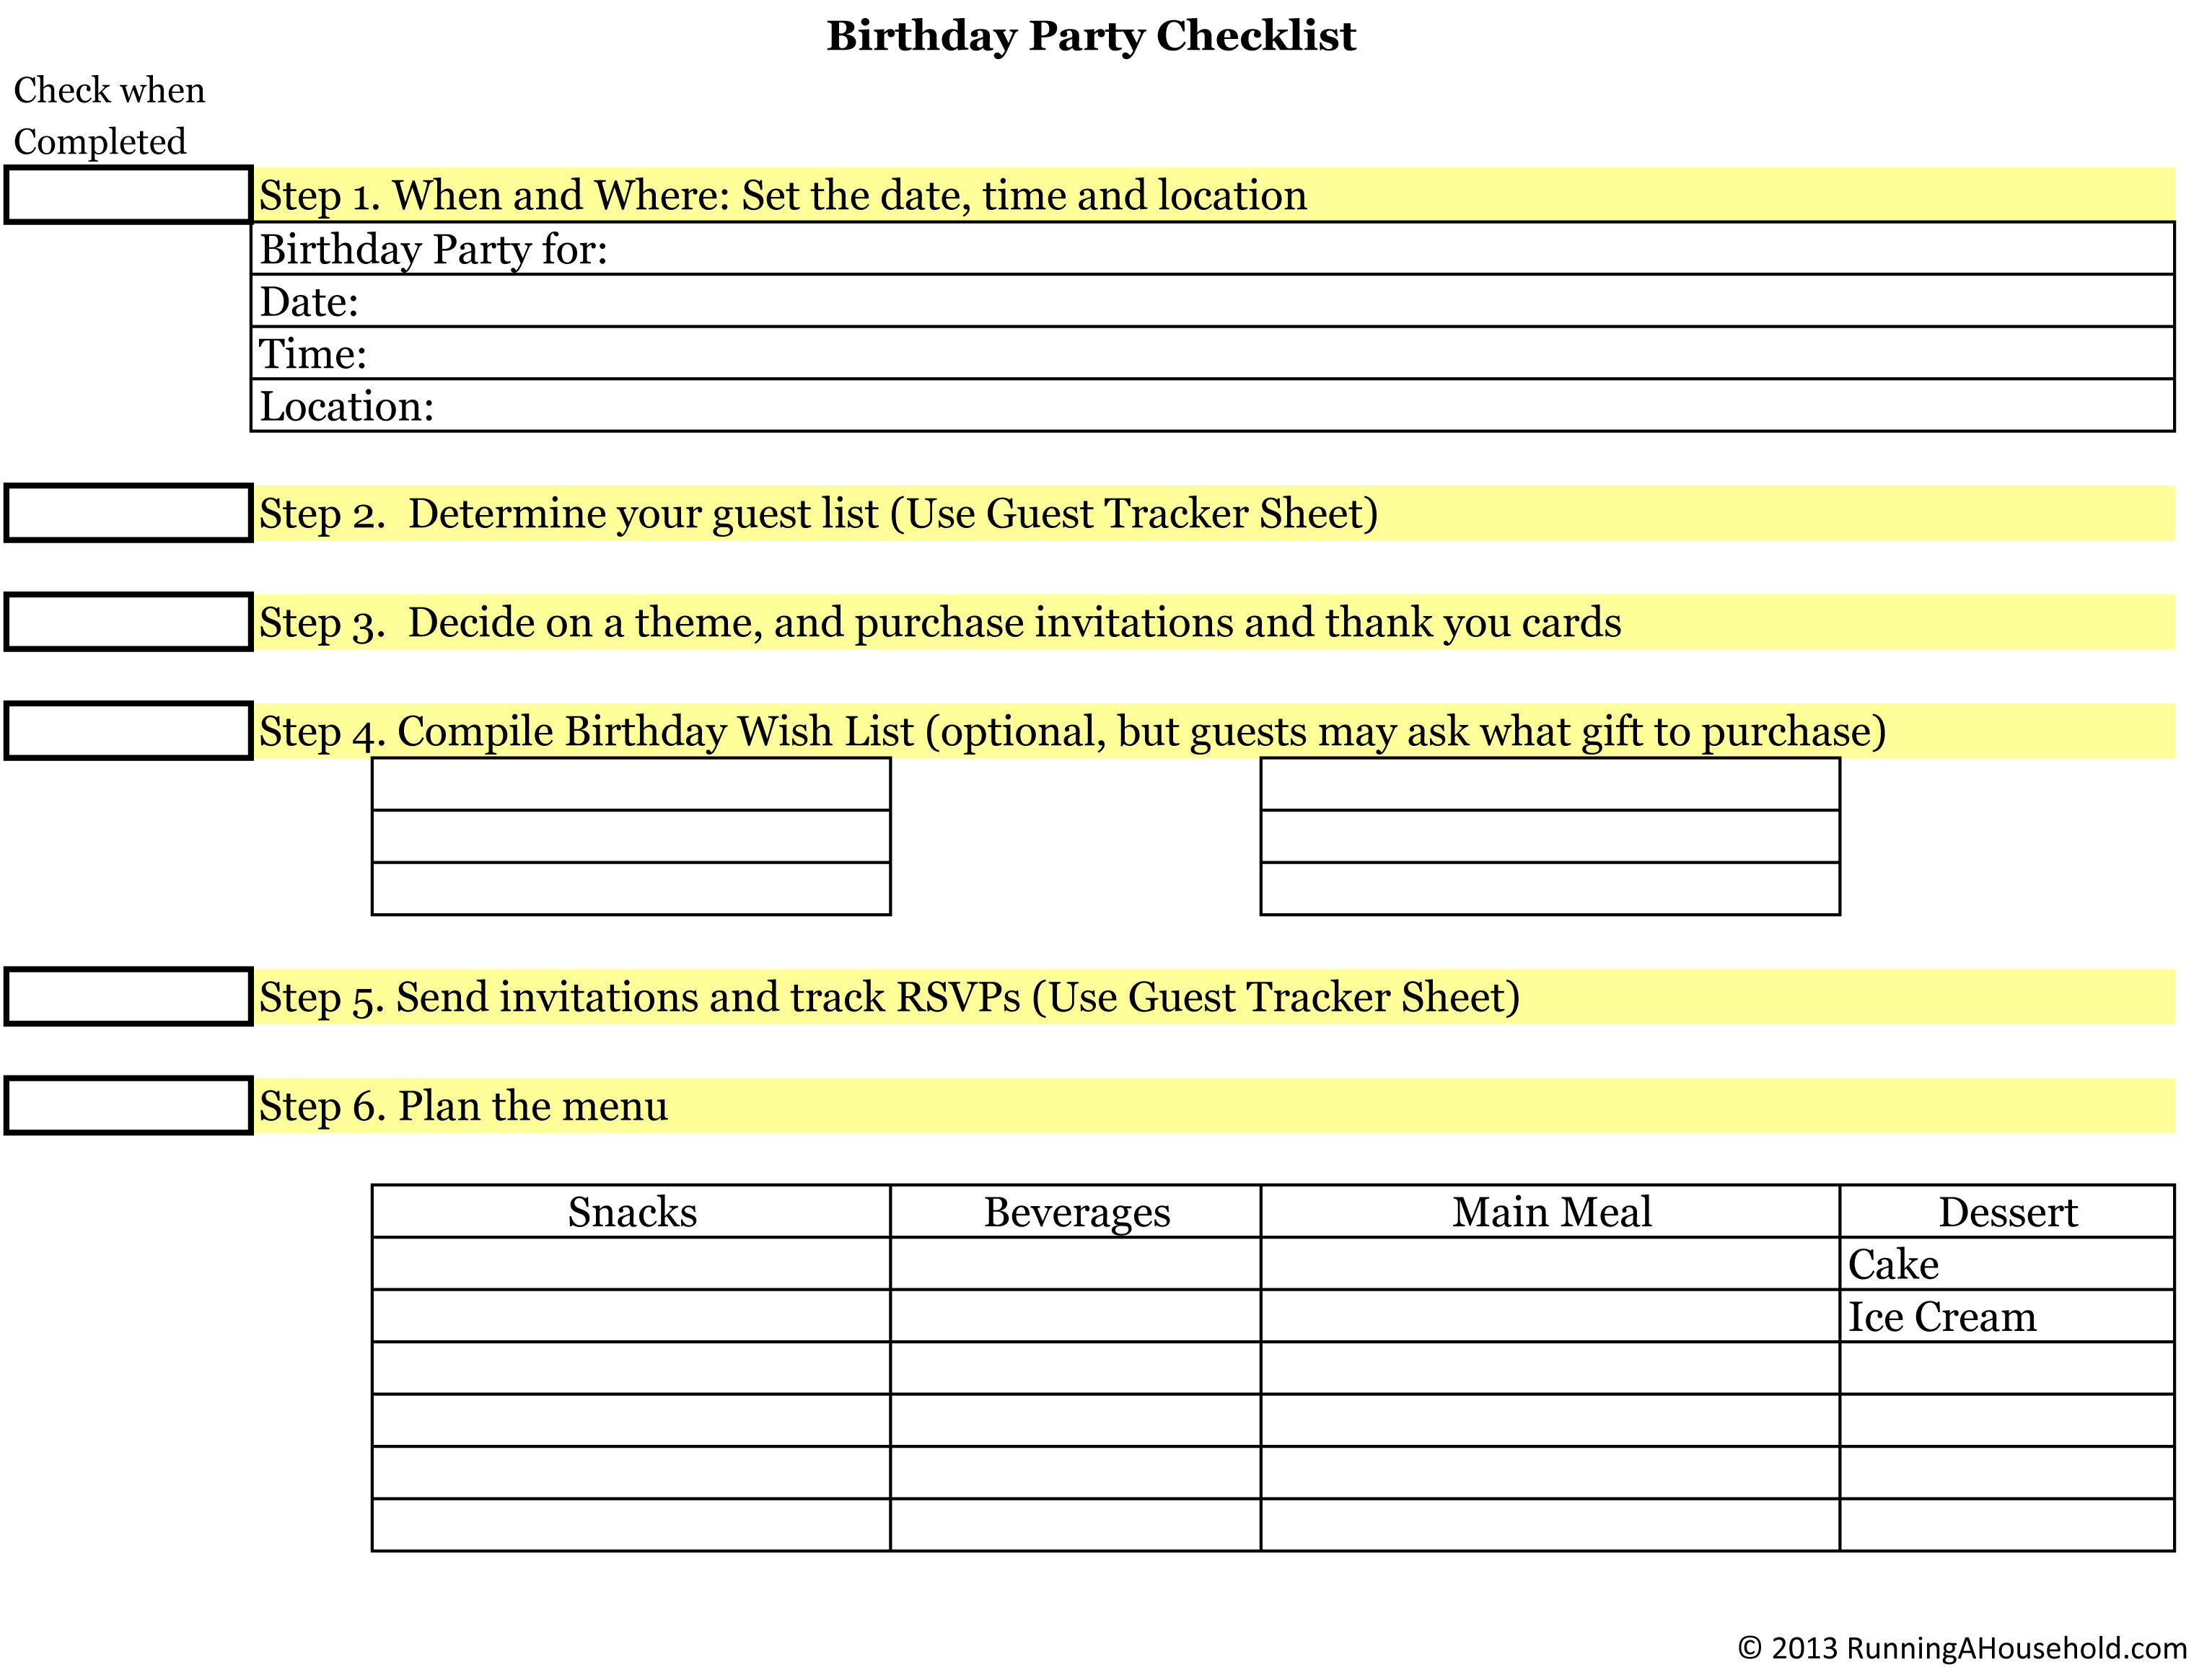 Swim Party Checklist and Backyard Party Planning Tips - Bless'er House